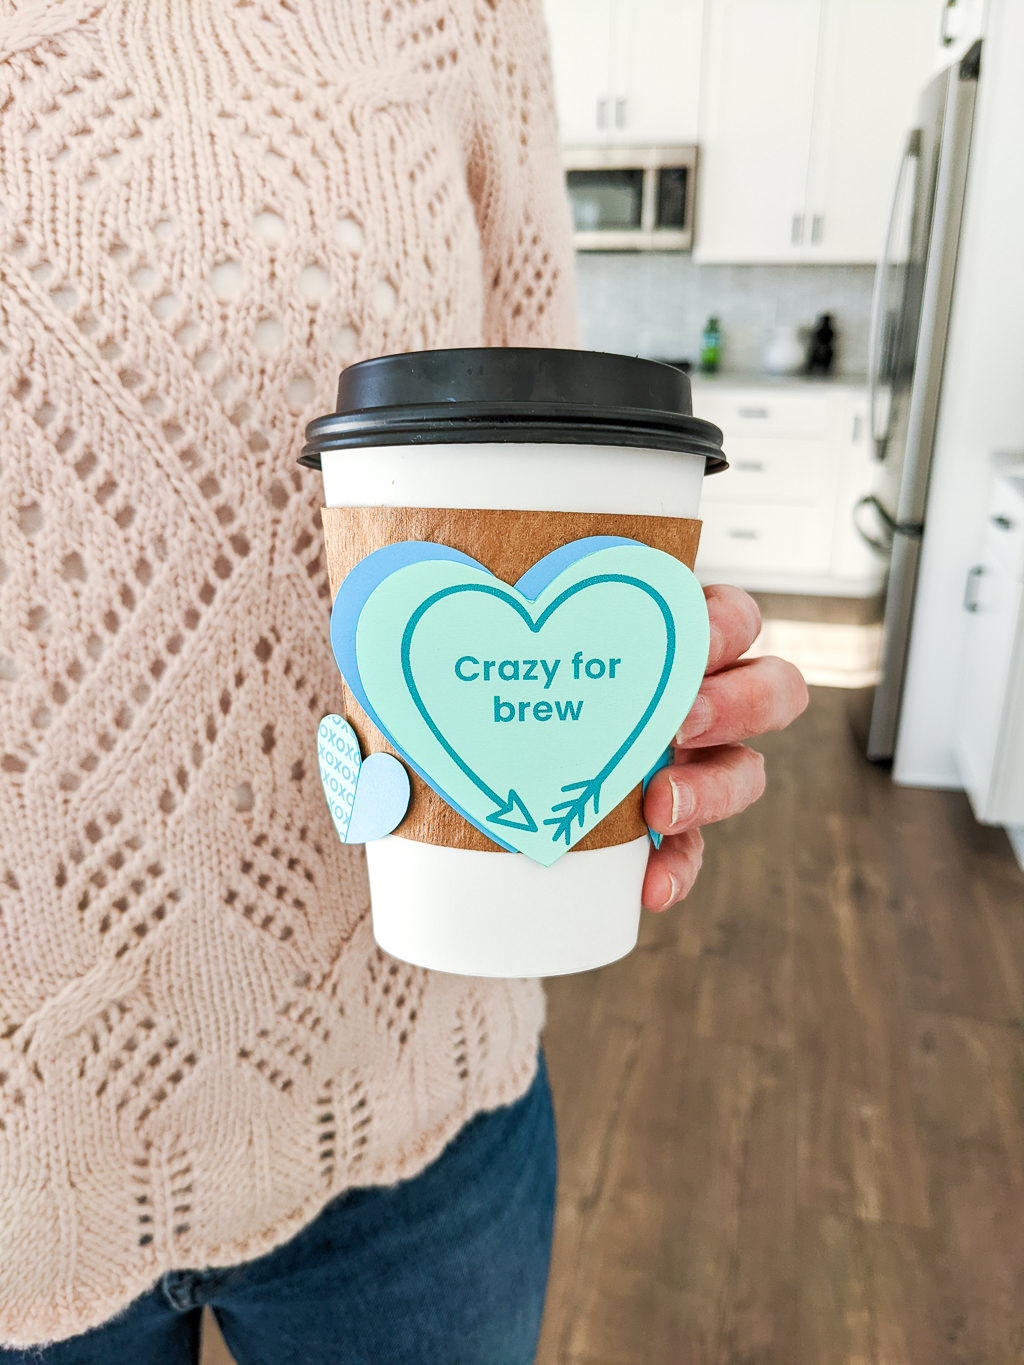 Crazy for brew DIY coffee gift for Valentine's Day